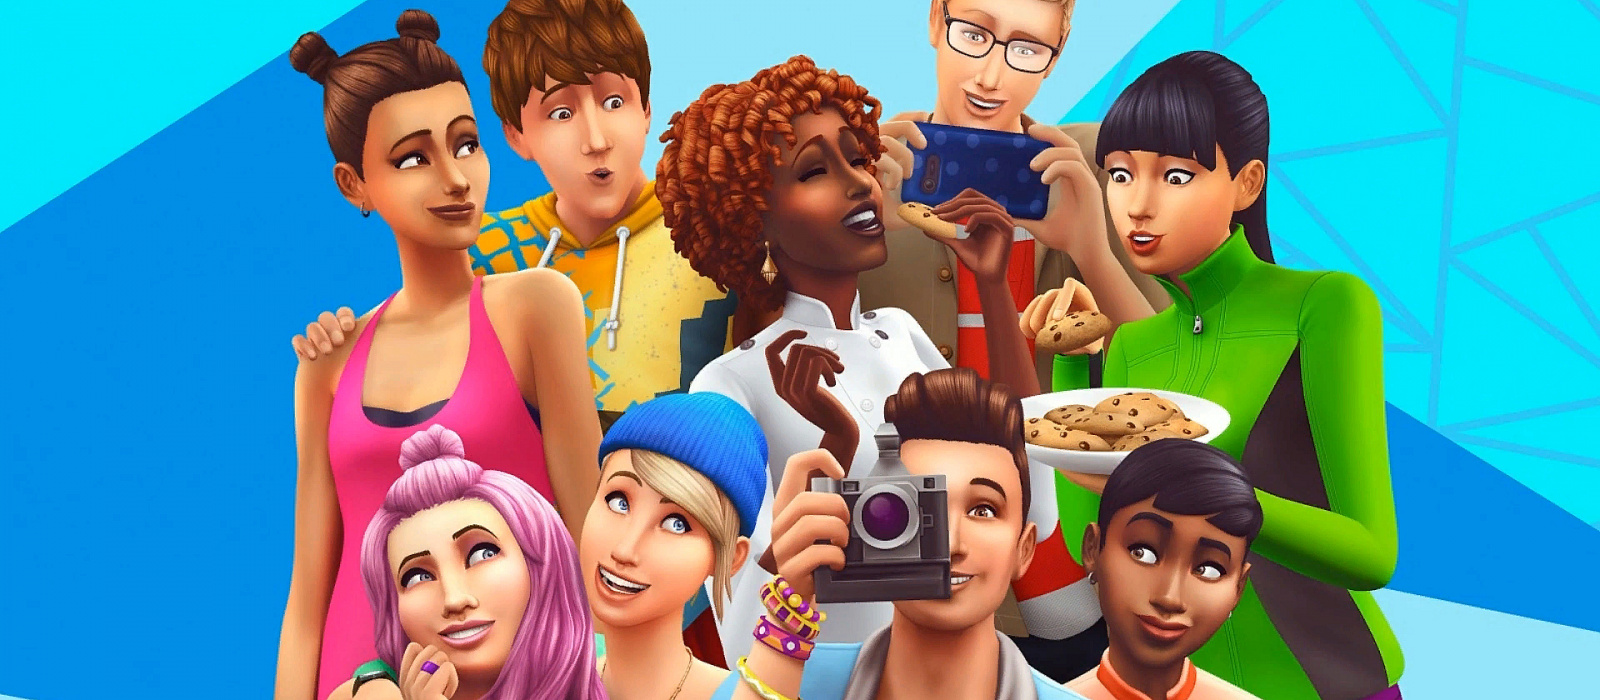 How to play The Sims 4 with friends online using a multiplayer mod